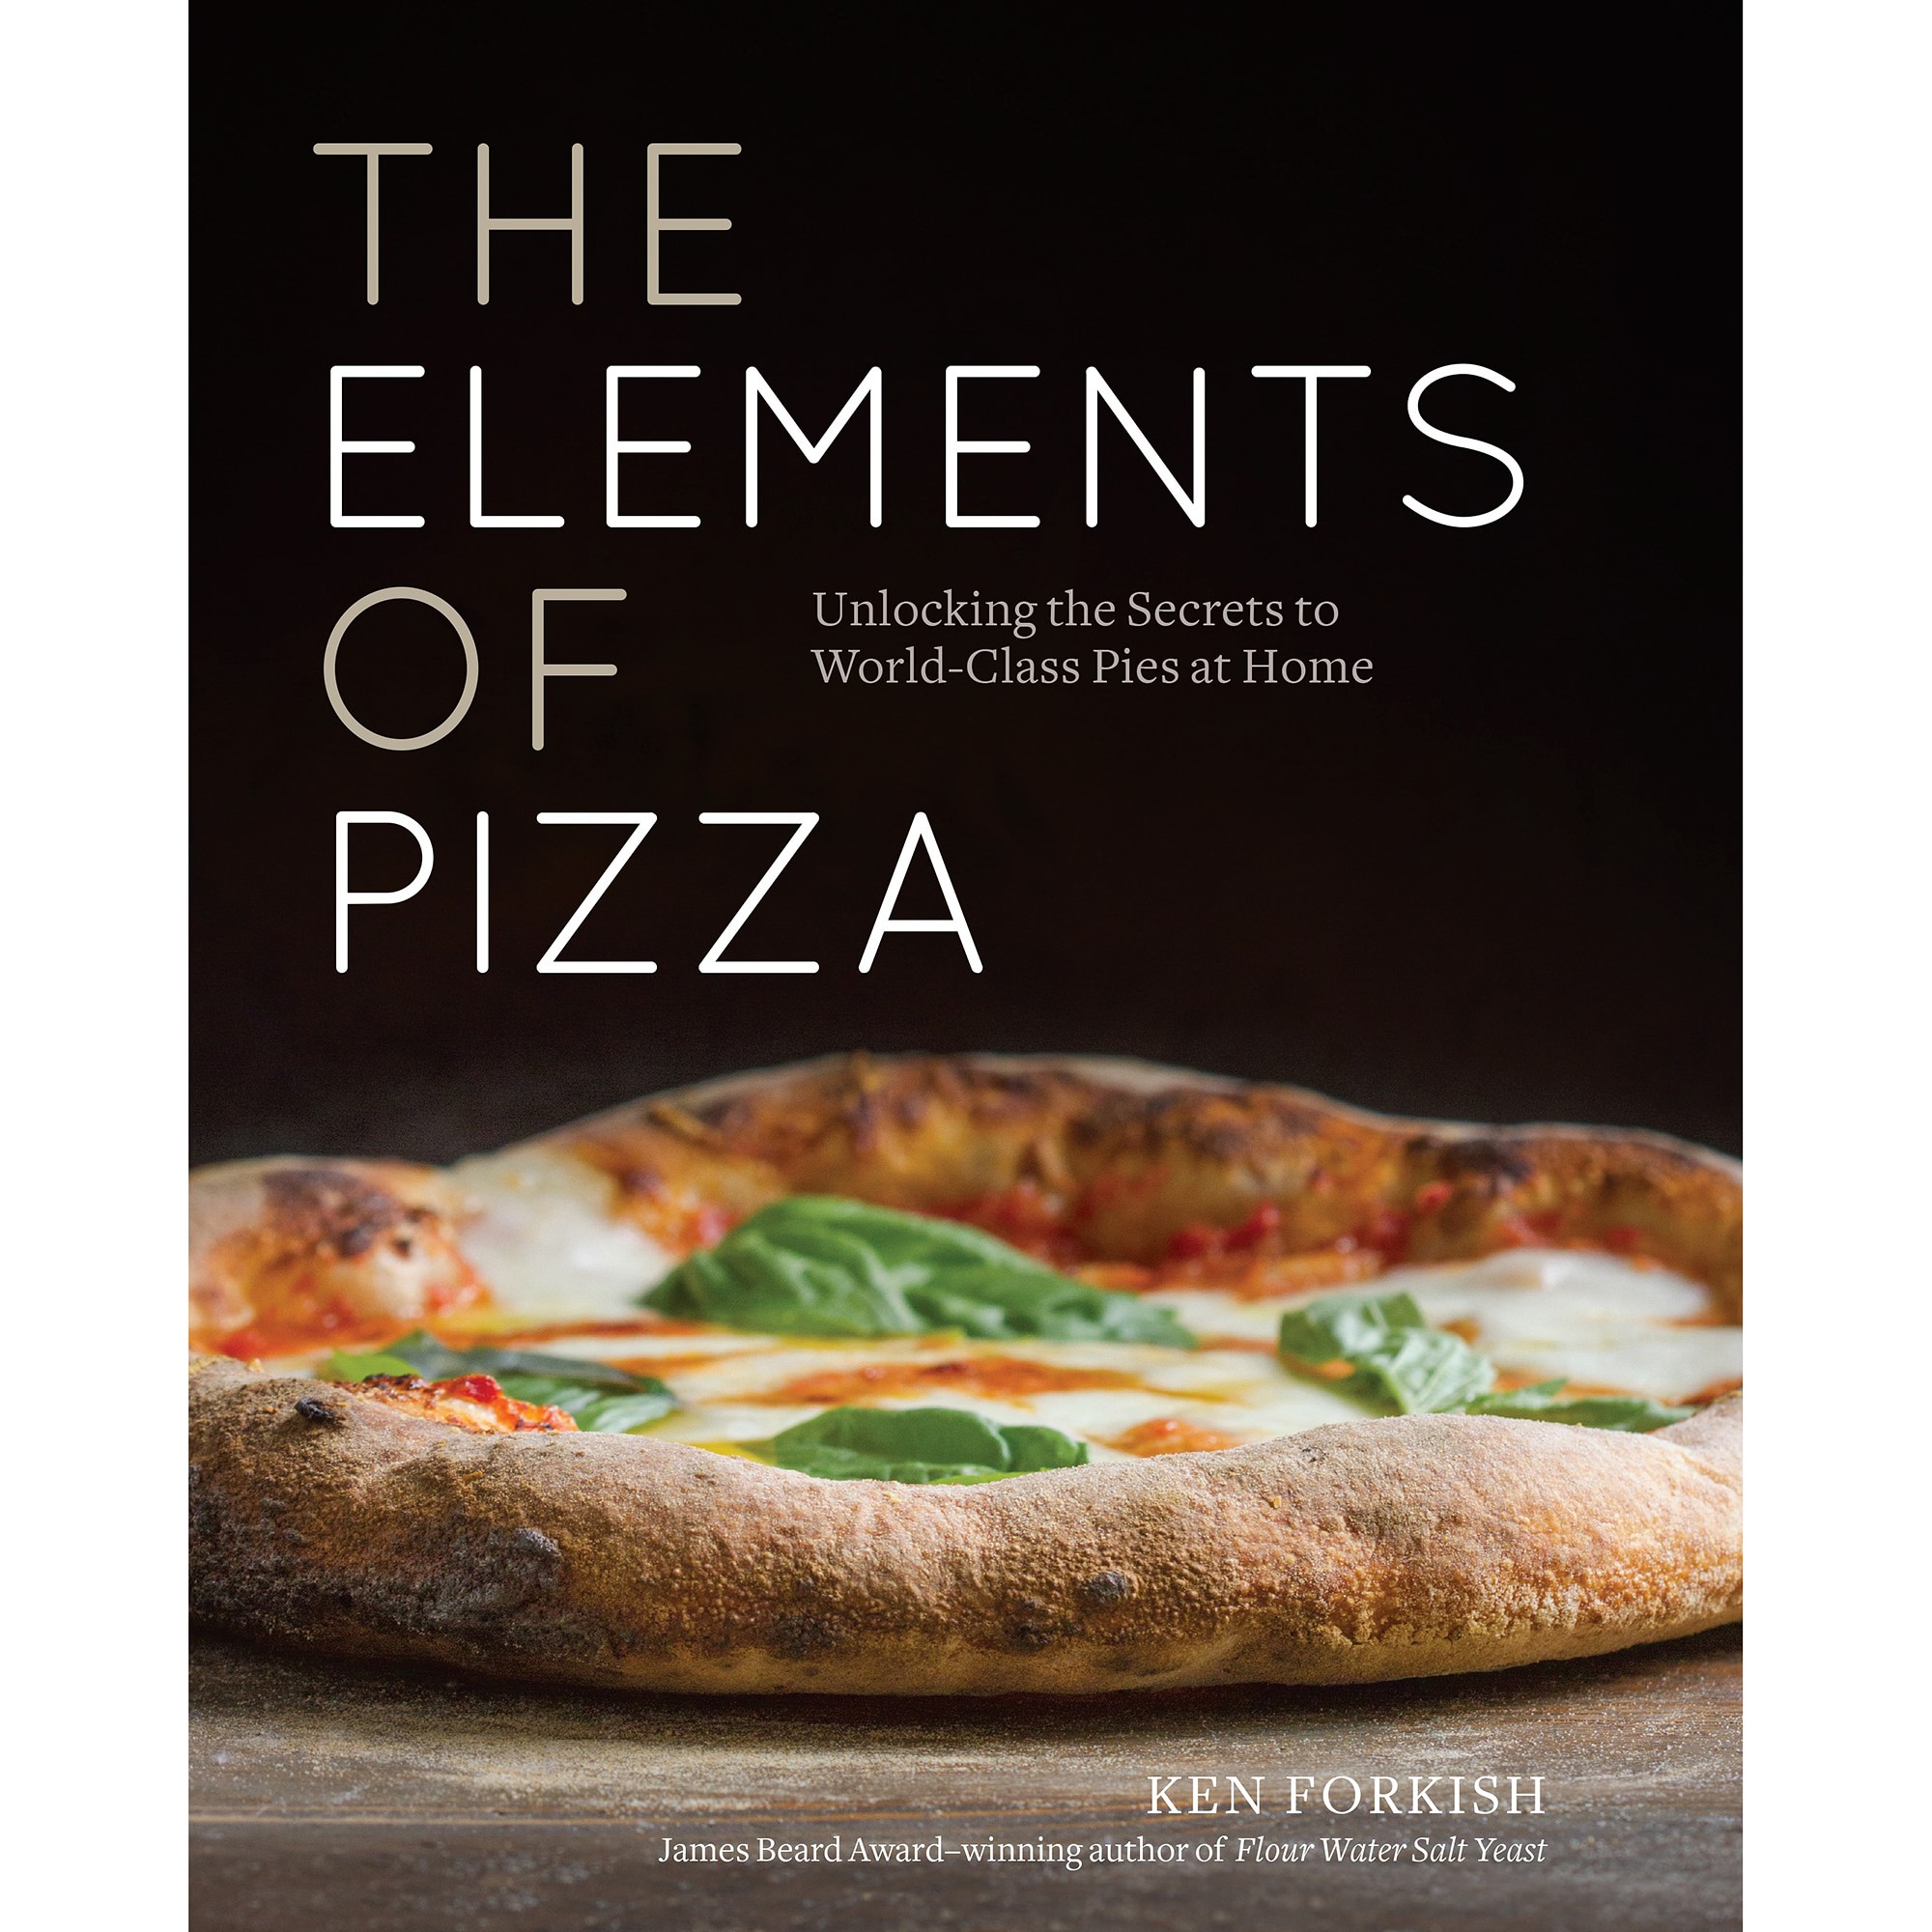 Ken Forkish: The Elements of Pizza: Unlocking the Secrets to World-Class Pies at Home